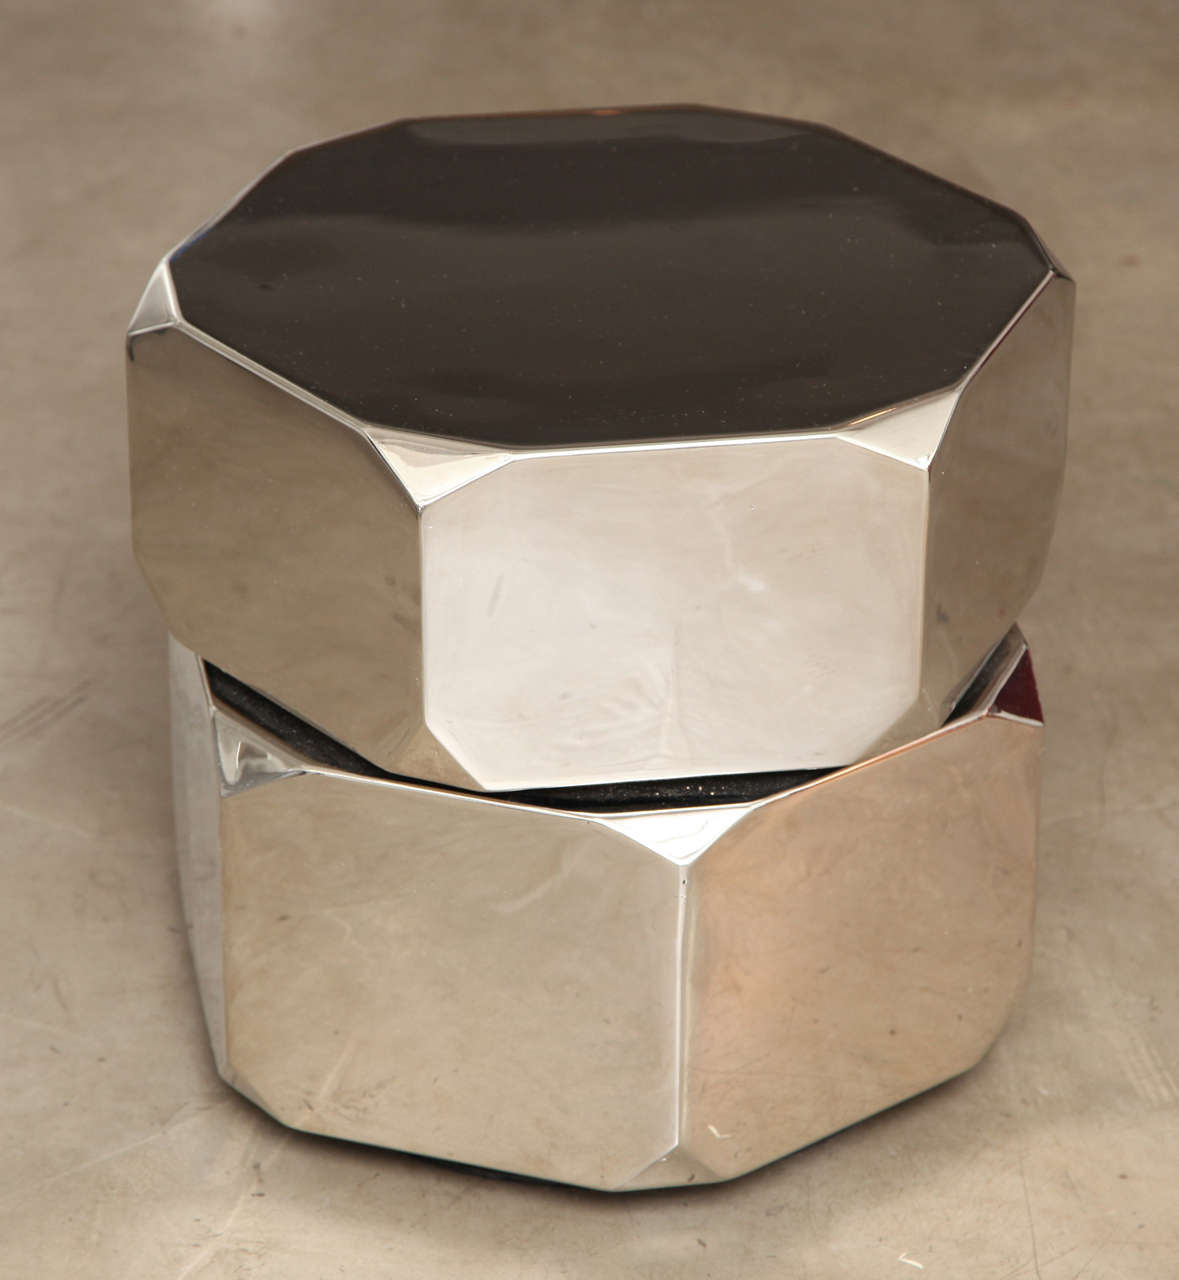 Side table, 2013
Nickel patinated brass
Turns on a central axis
Edition of 8 + 4 AP
Measures: H 15.75 x D 17.7 in
(40 x 45 cm).
Maurice Marty's skills cover the gamut of interior, surface and object works: he is a sculptor, a designer, an architect,